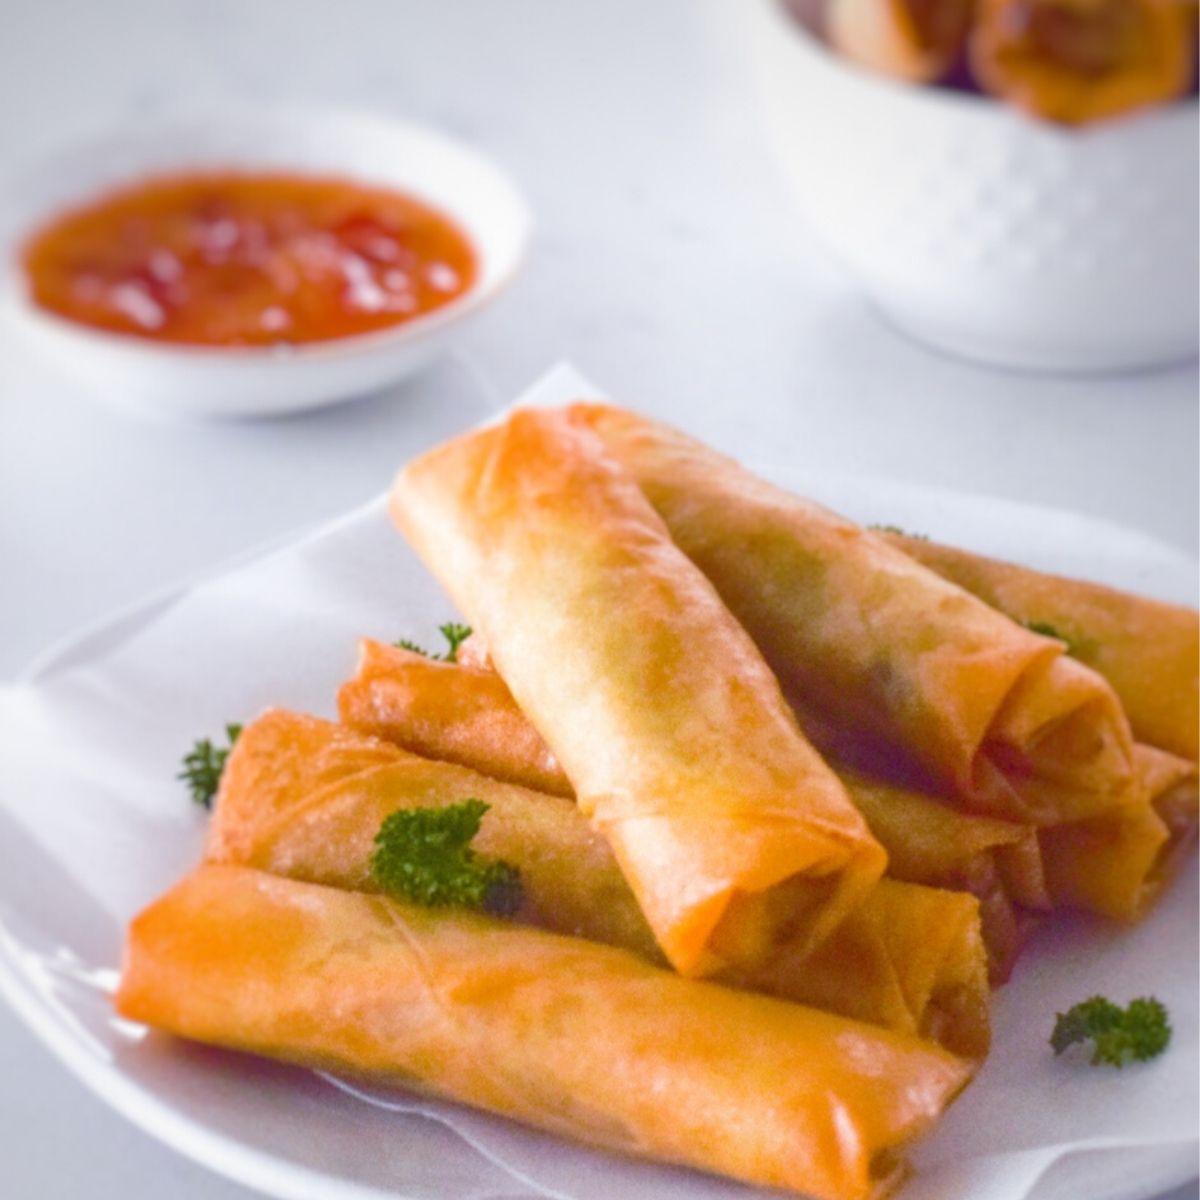 Vegetable Spring Rolls on a white plate